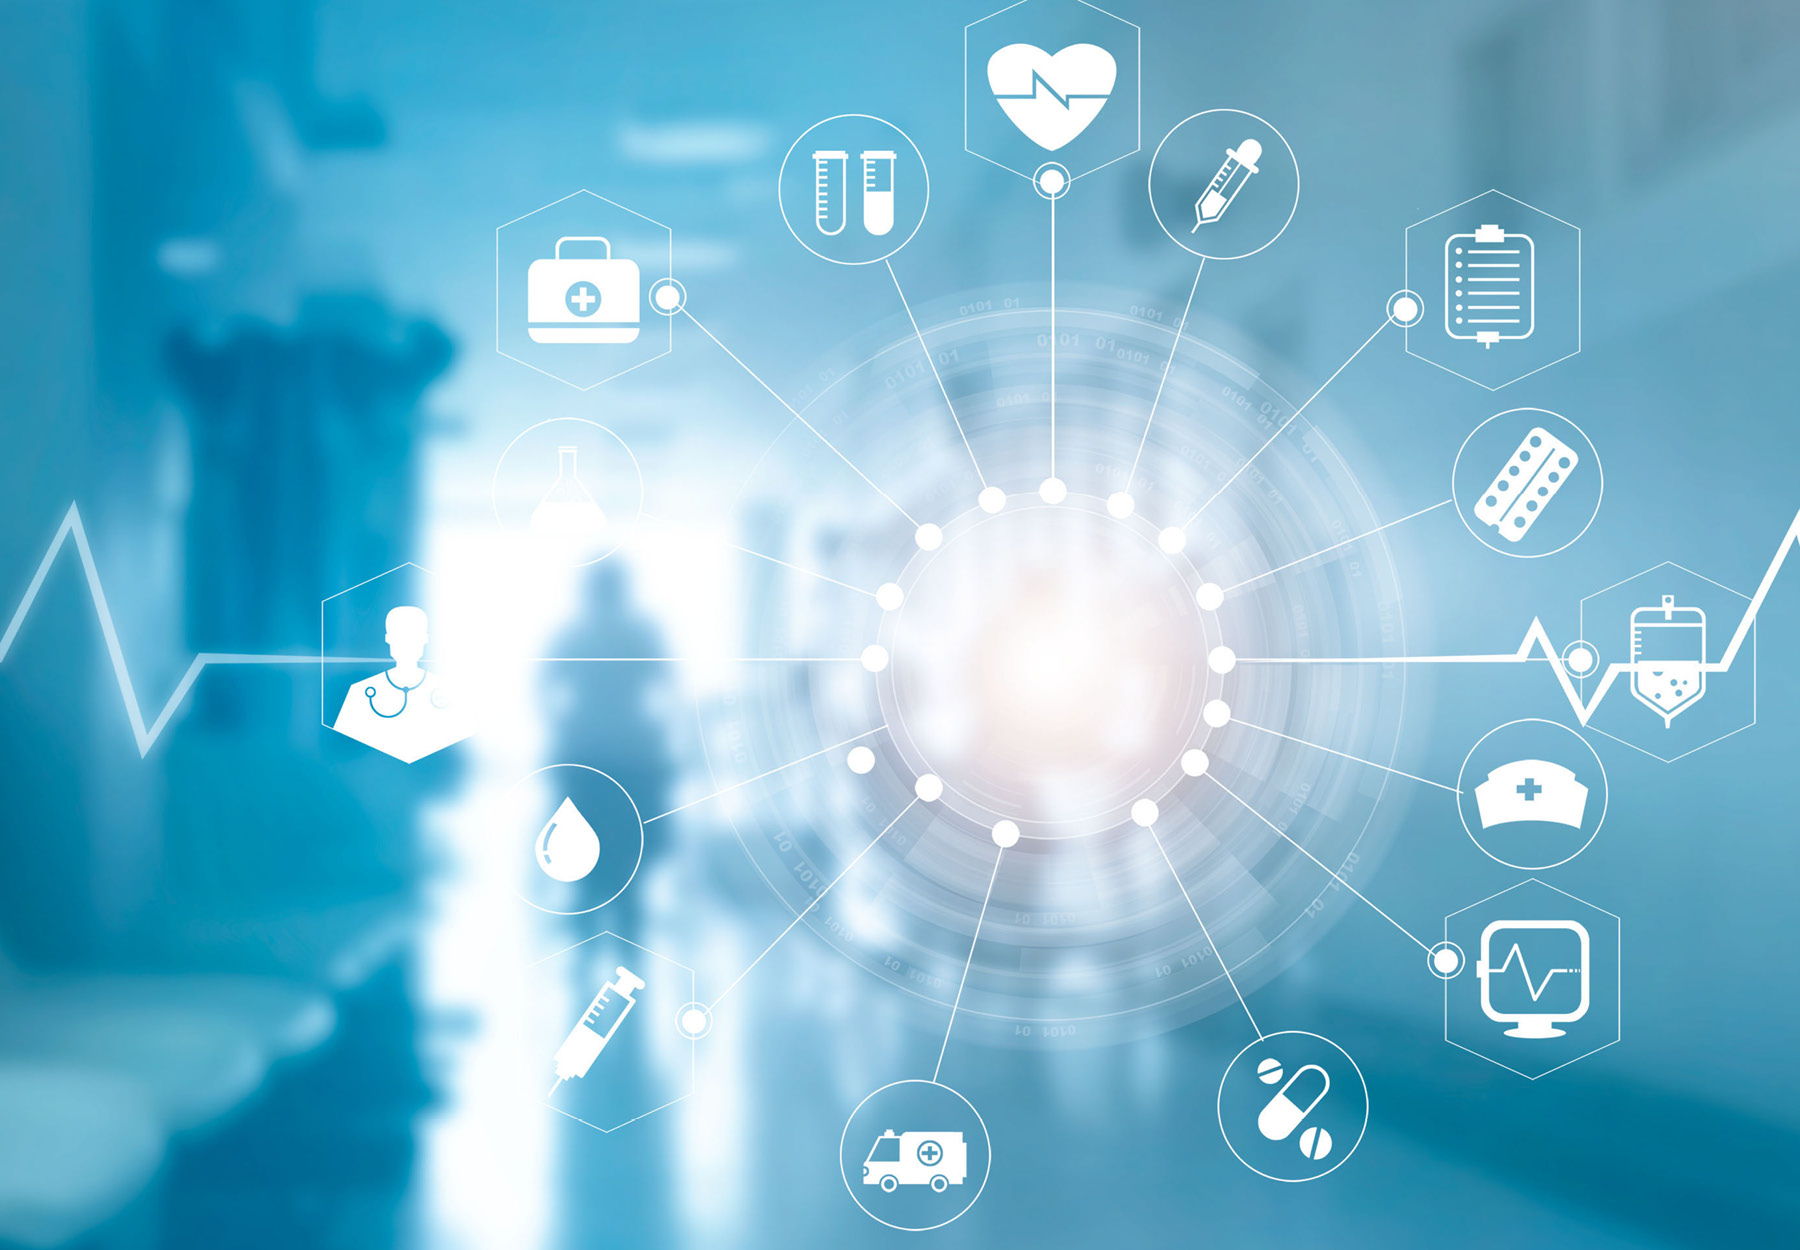 Blue-toned photo illustration of hospital hallway with various healthcare-related icons overlaid in white. Healthcare industry concept. iStock image.